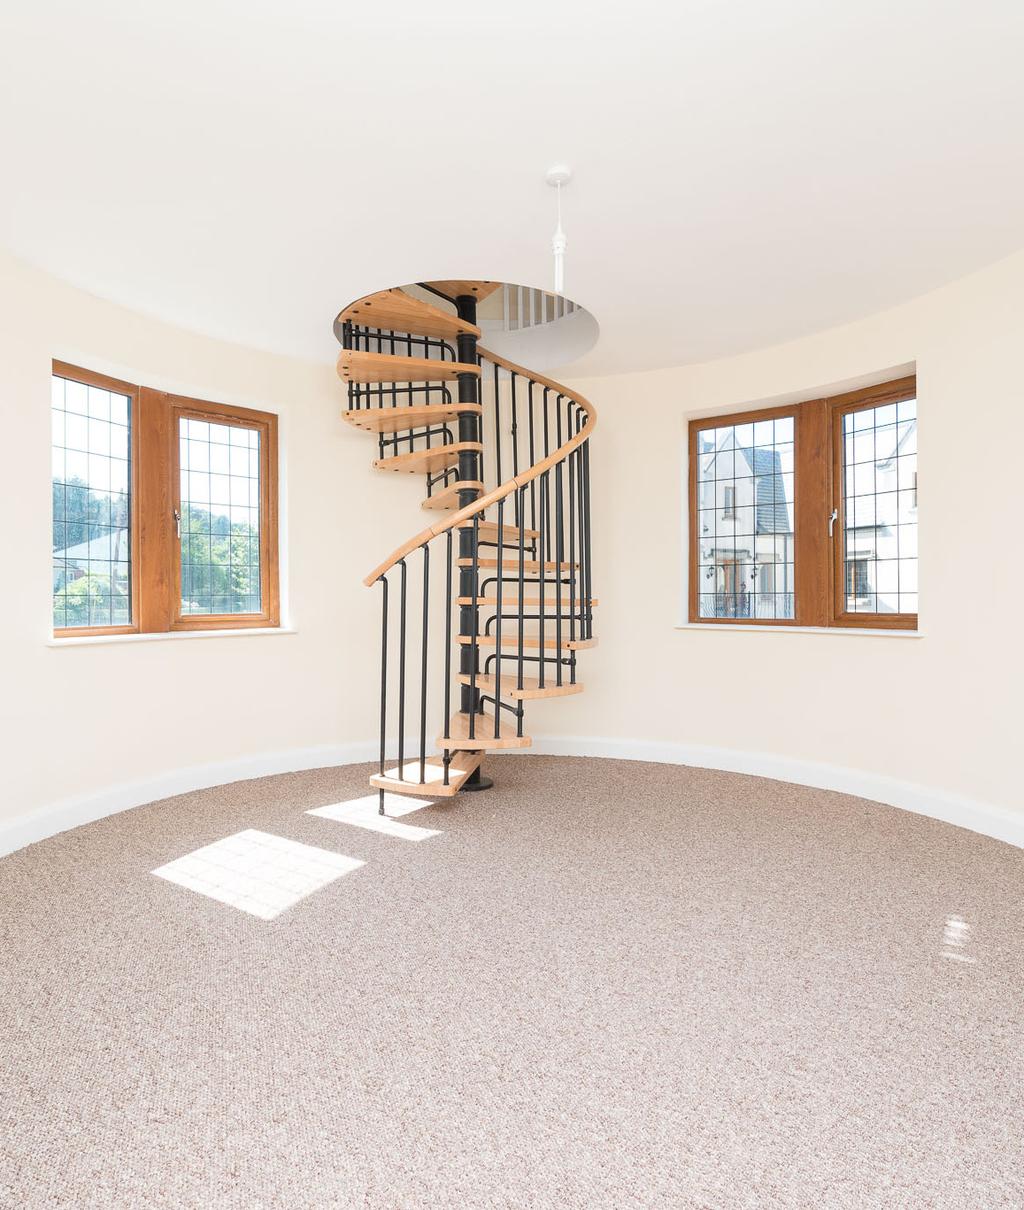 Integral built-in spiral staircase leading to: STUDY/SITTING OR DRESSING AREA: 13 11 x 13 8 (at widest points) (4.24m x 4.17m) Fantastic views across Belfast Lough to the County Antrim hills.